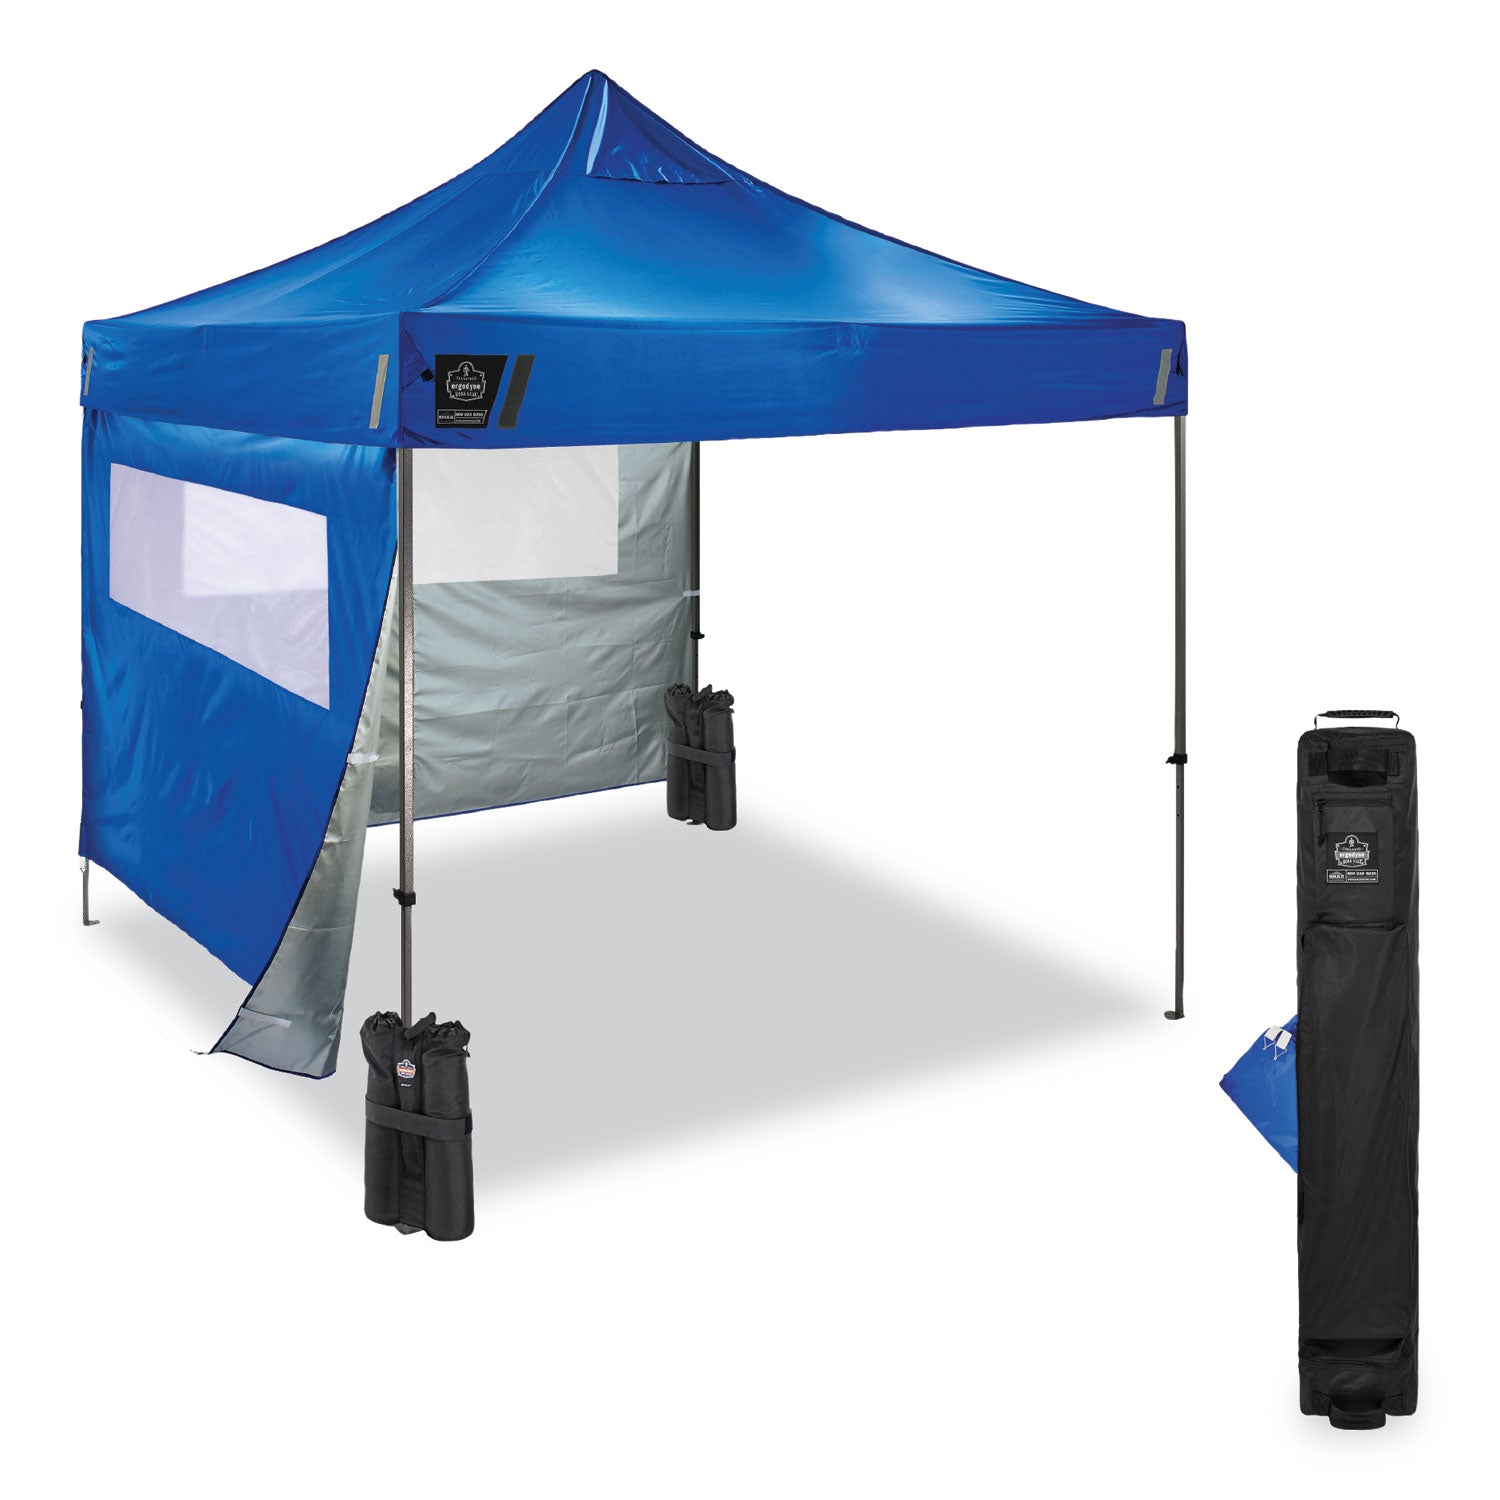 shax-6052-heavy-duty-tent-kit-+-mesh-windows-single-skin-10-ft-x-10-ft-polyester-steel-blue-ships-in-1-3-business-days_ego12982 - 1